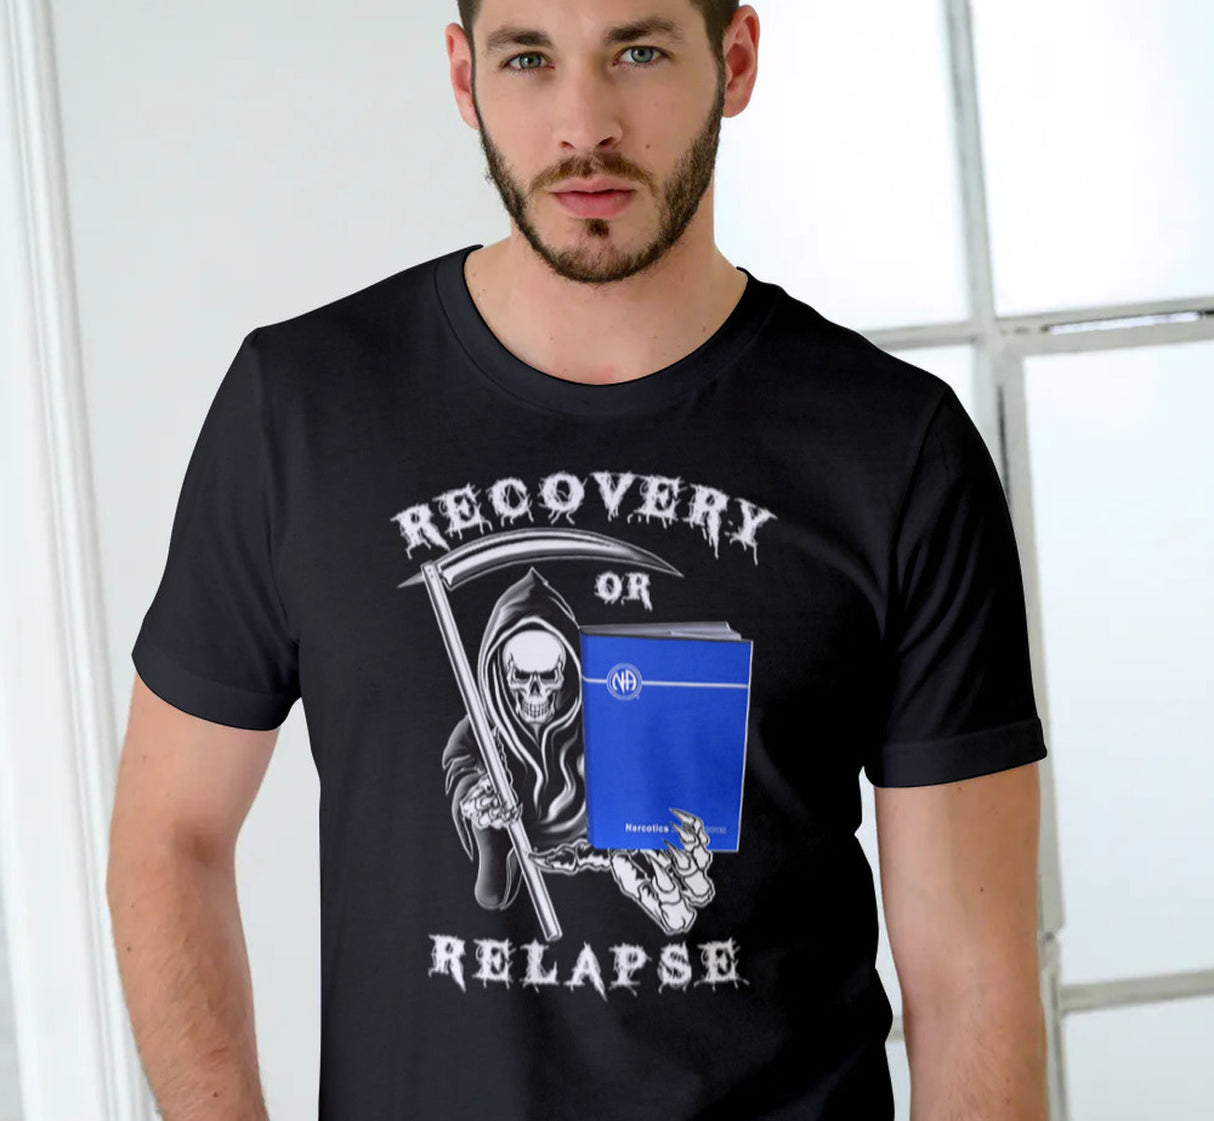  NA RECOVERY OR RELAPSE REAPER  Tee